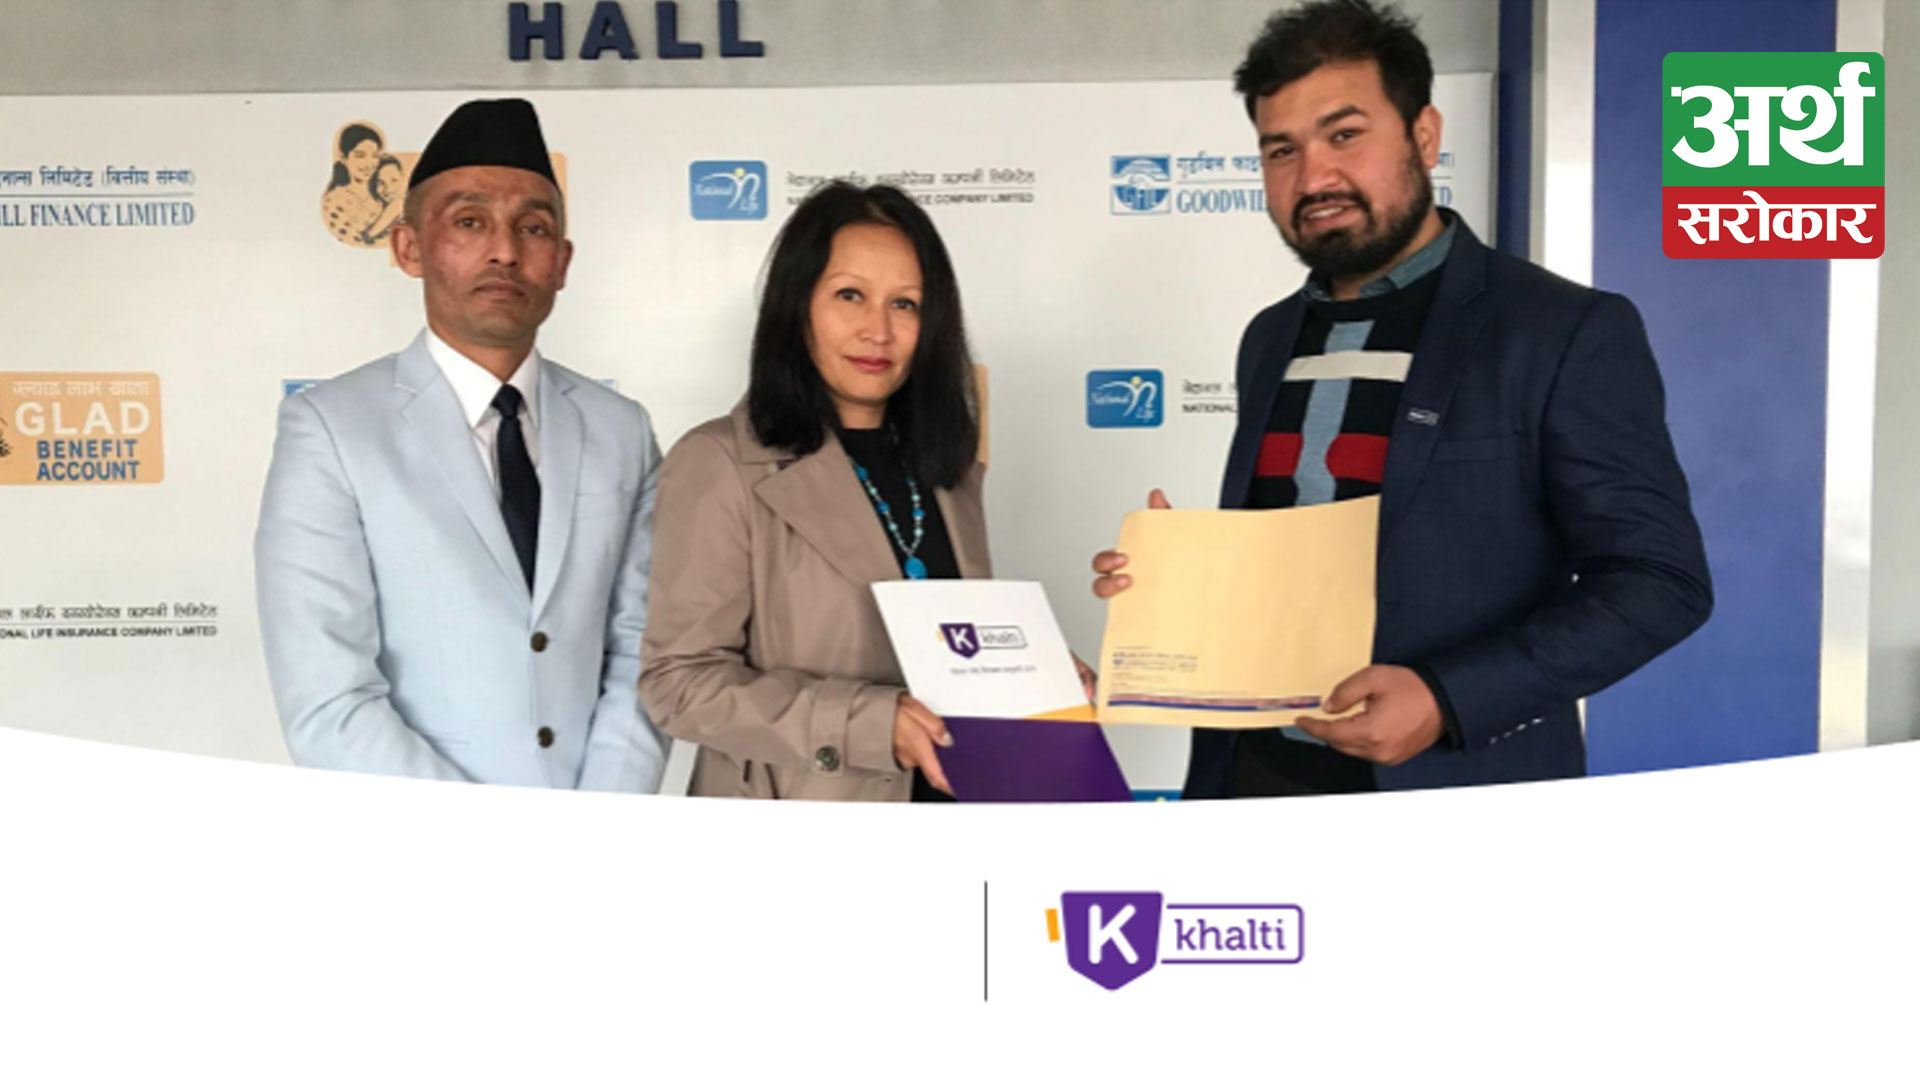 Khalti and Goodwill Finance have collaborated, enabling bank link service payments in more than 60,000 places